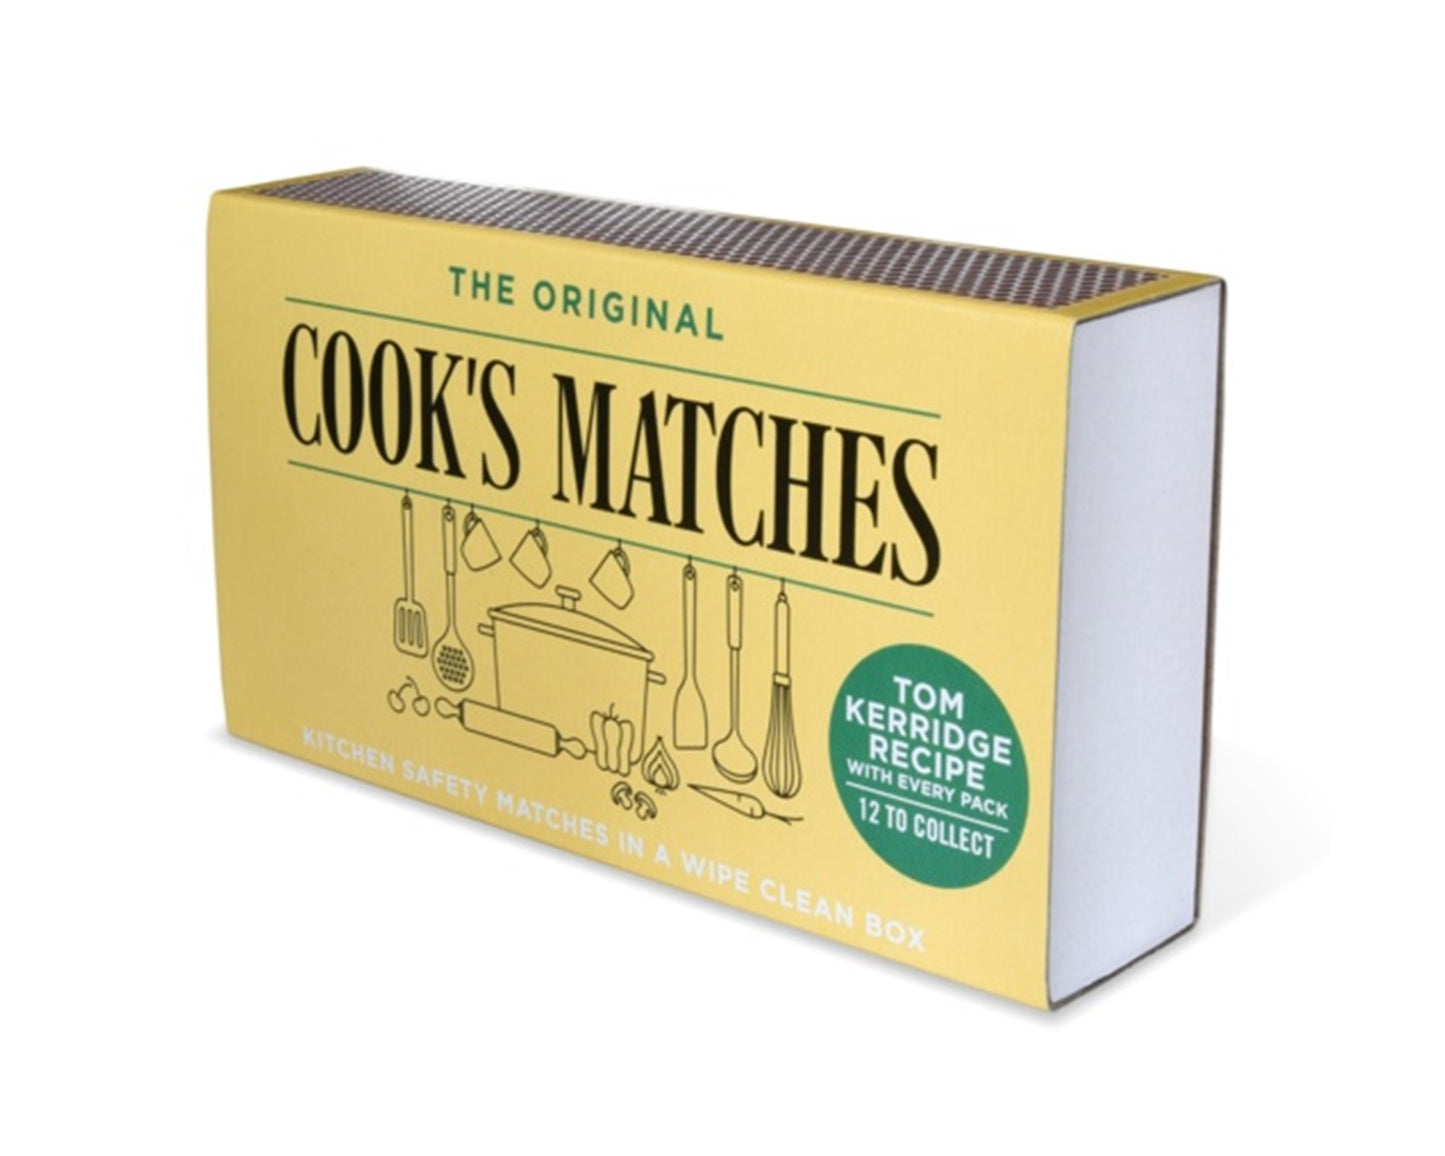 The Original Cooks Safety Matches Traditional Wipe Clean Box (220pcs)